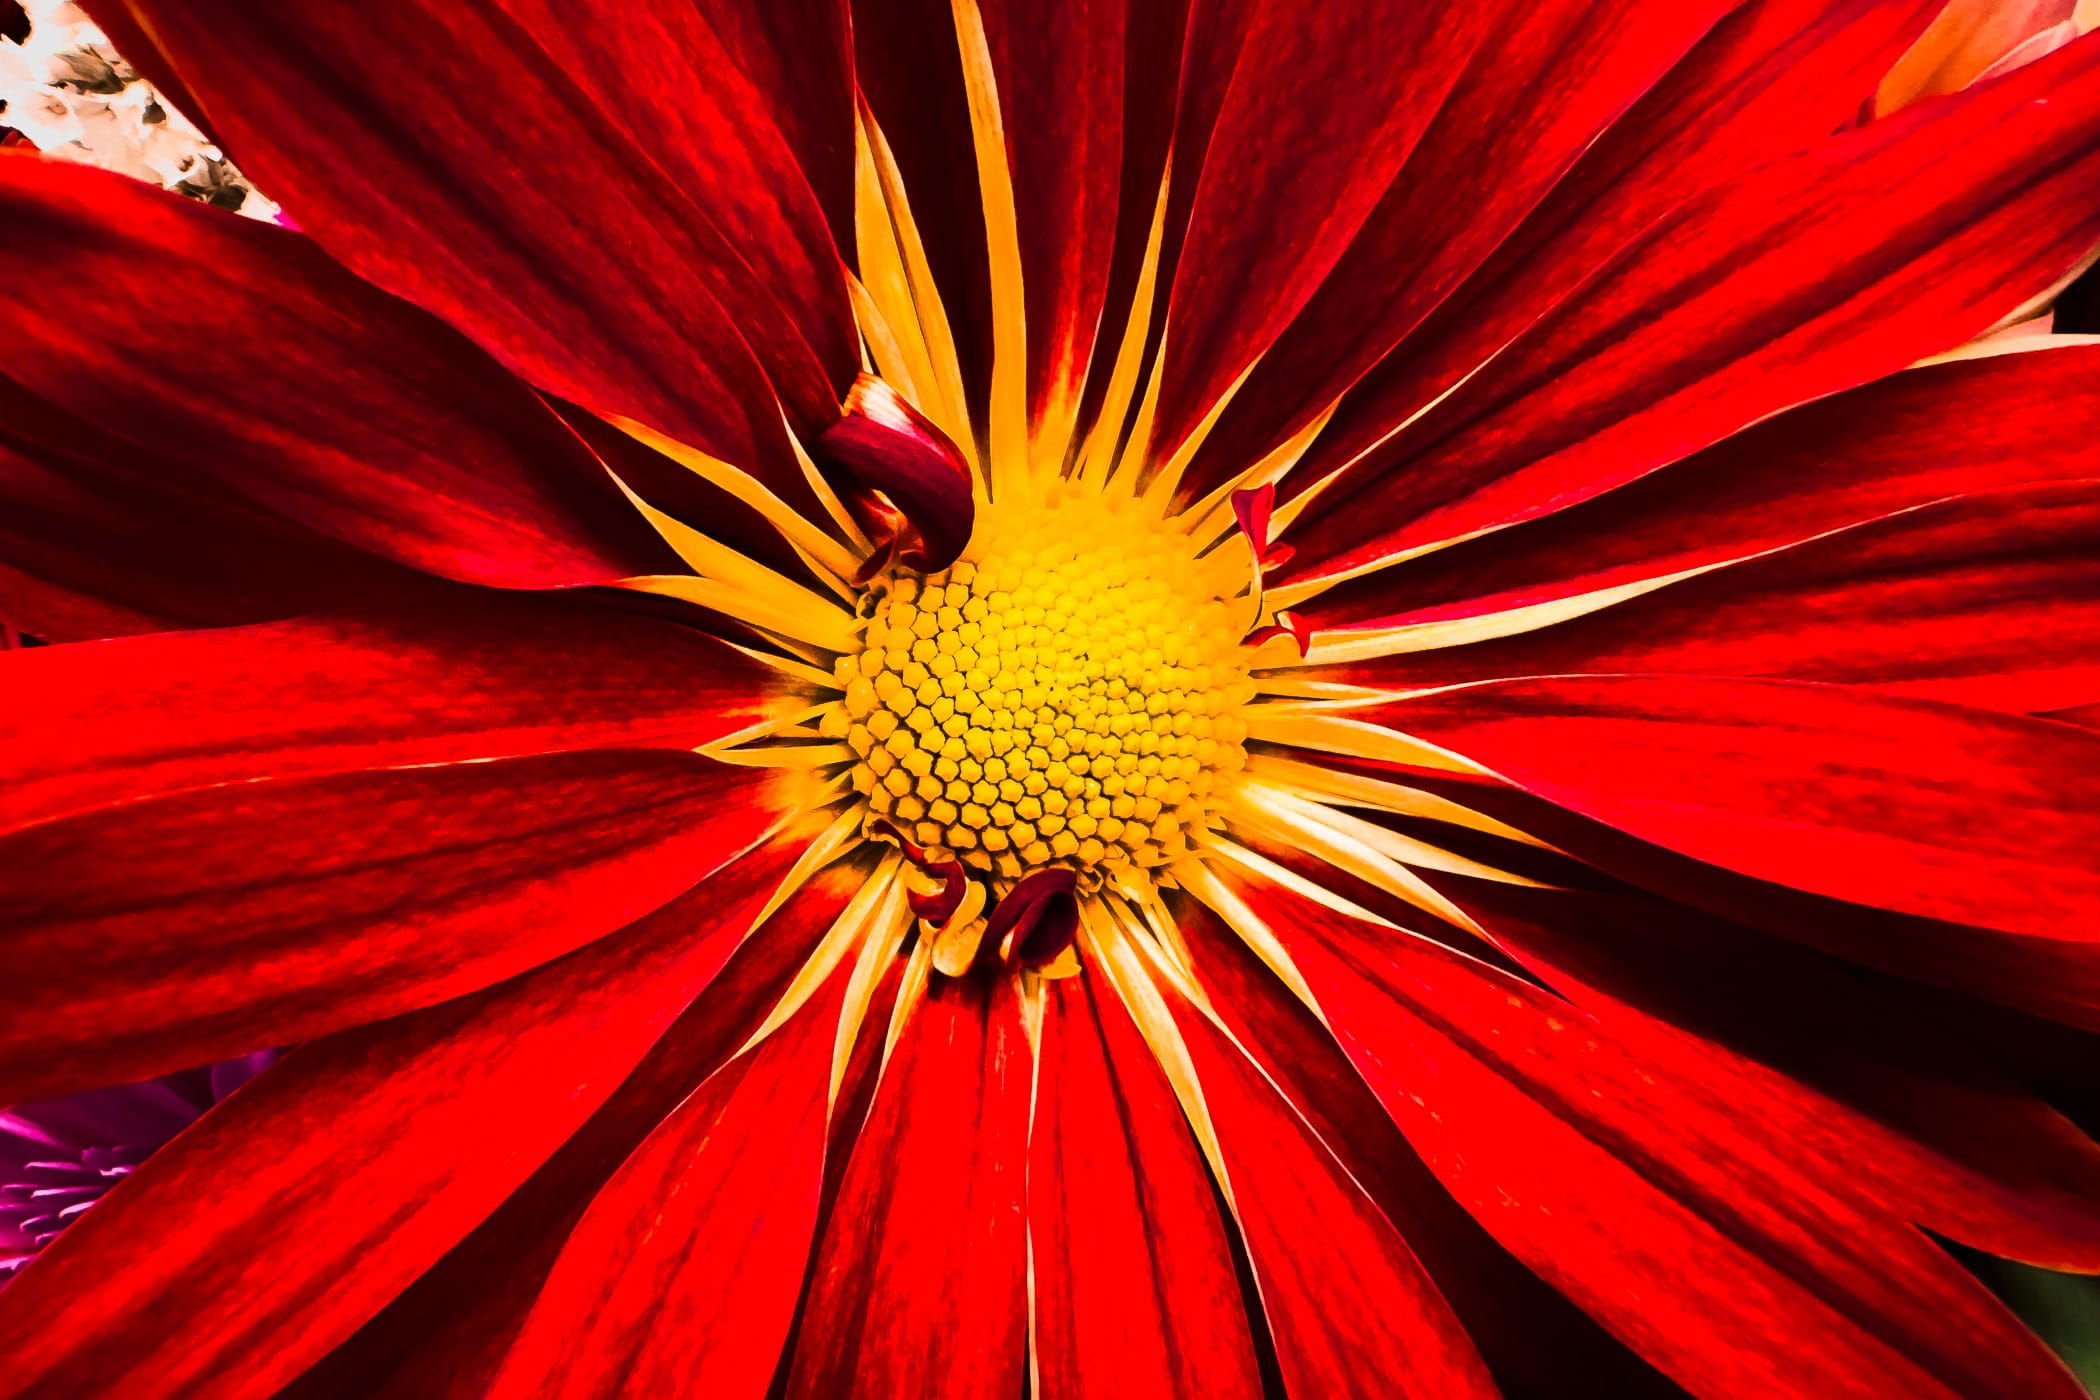 Detail of a red daisy, spottted in McKinney, Texas.